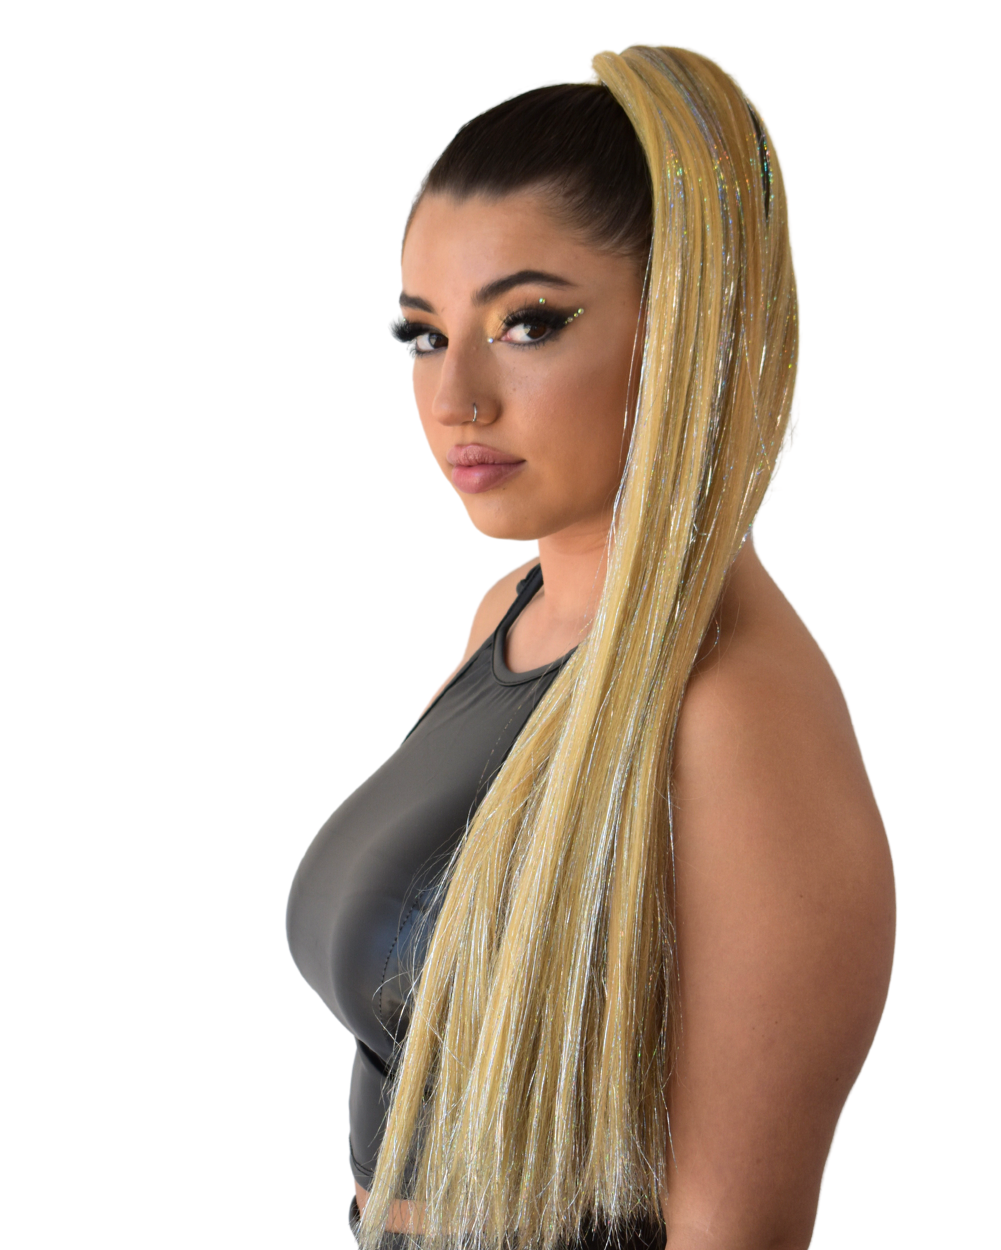 Champagne Sparkle - Blonde Ponytail Hair Extension with Silver Tinsel - Lunautics Ponytail Hair Extension